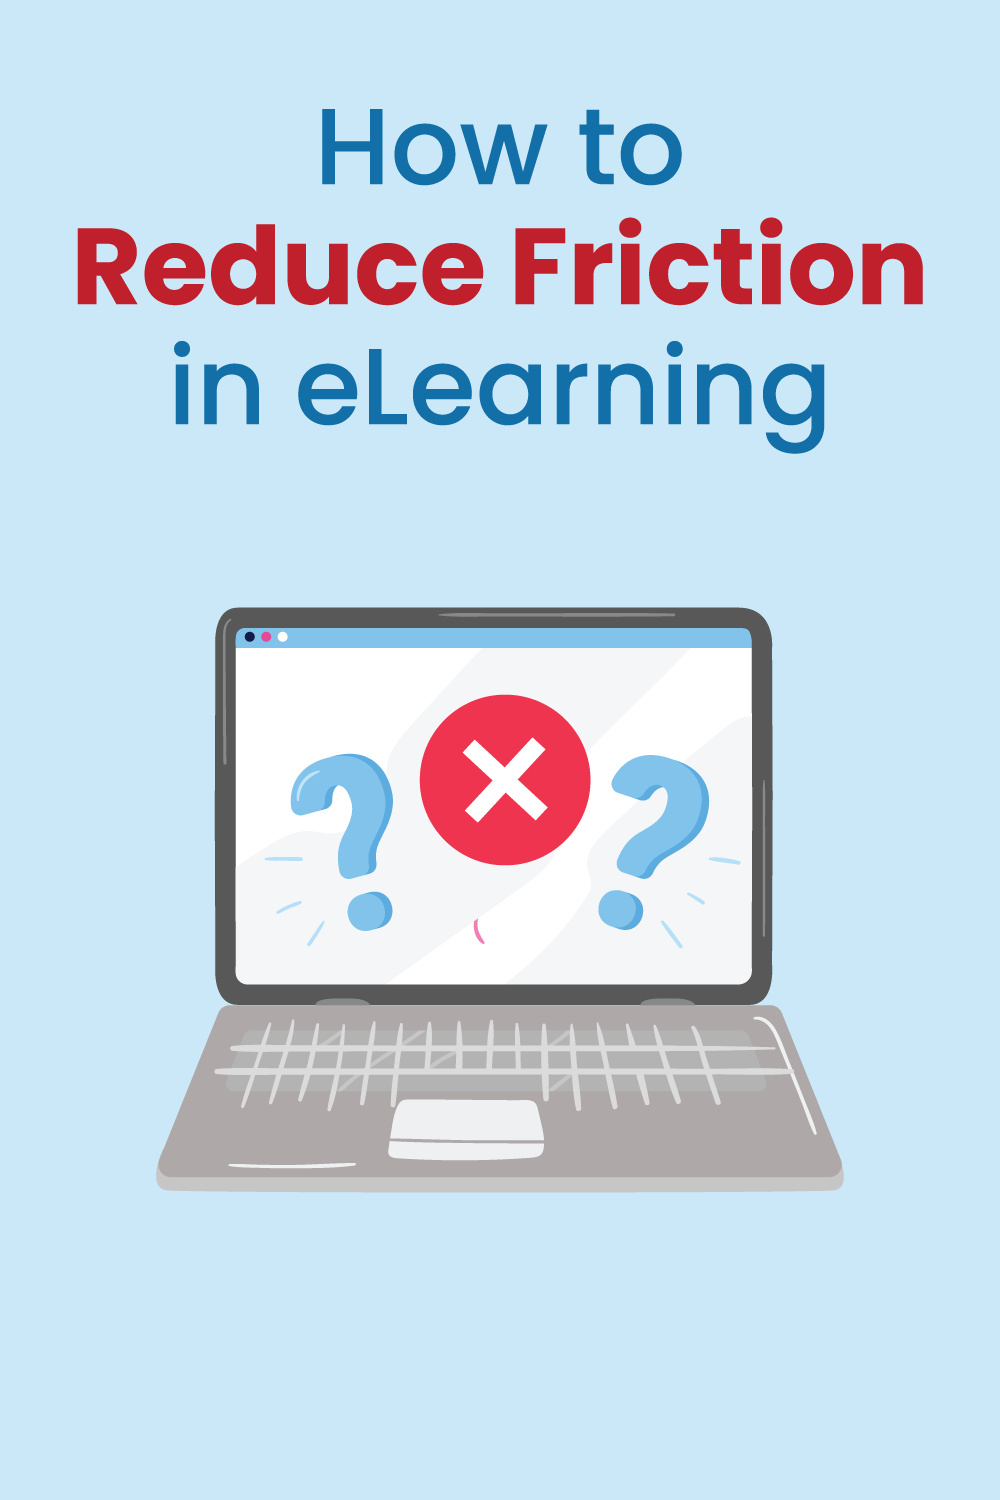 How to Reduce Friction in eLearning